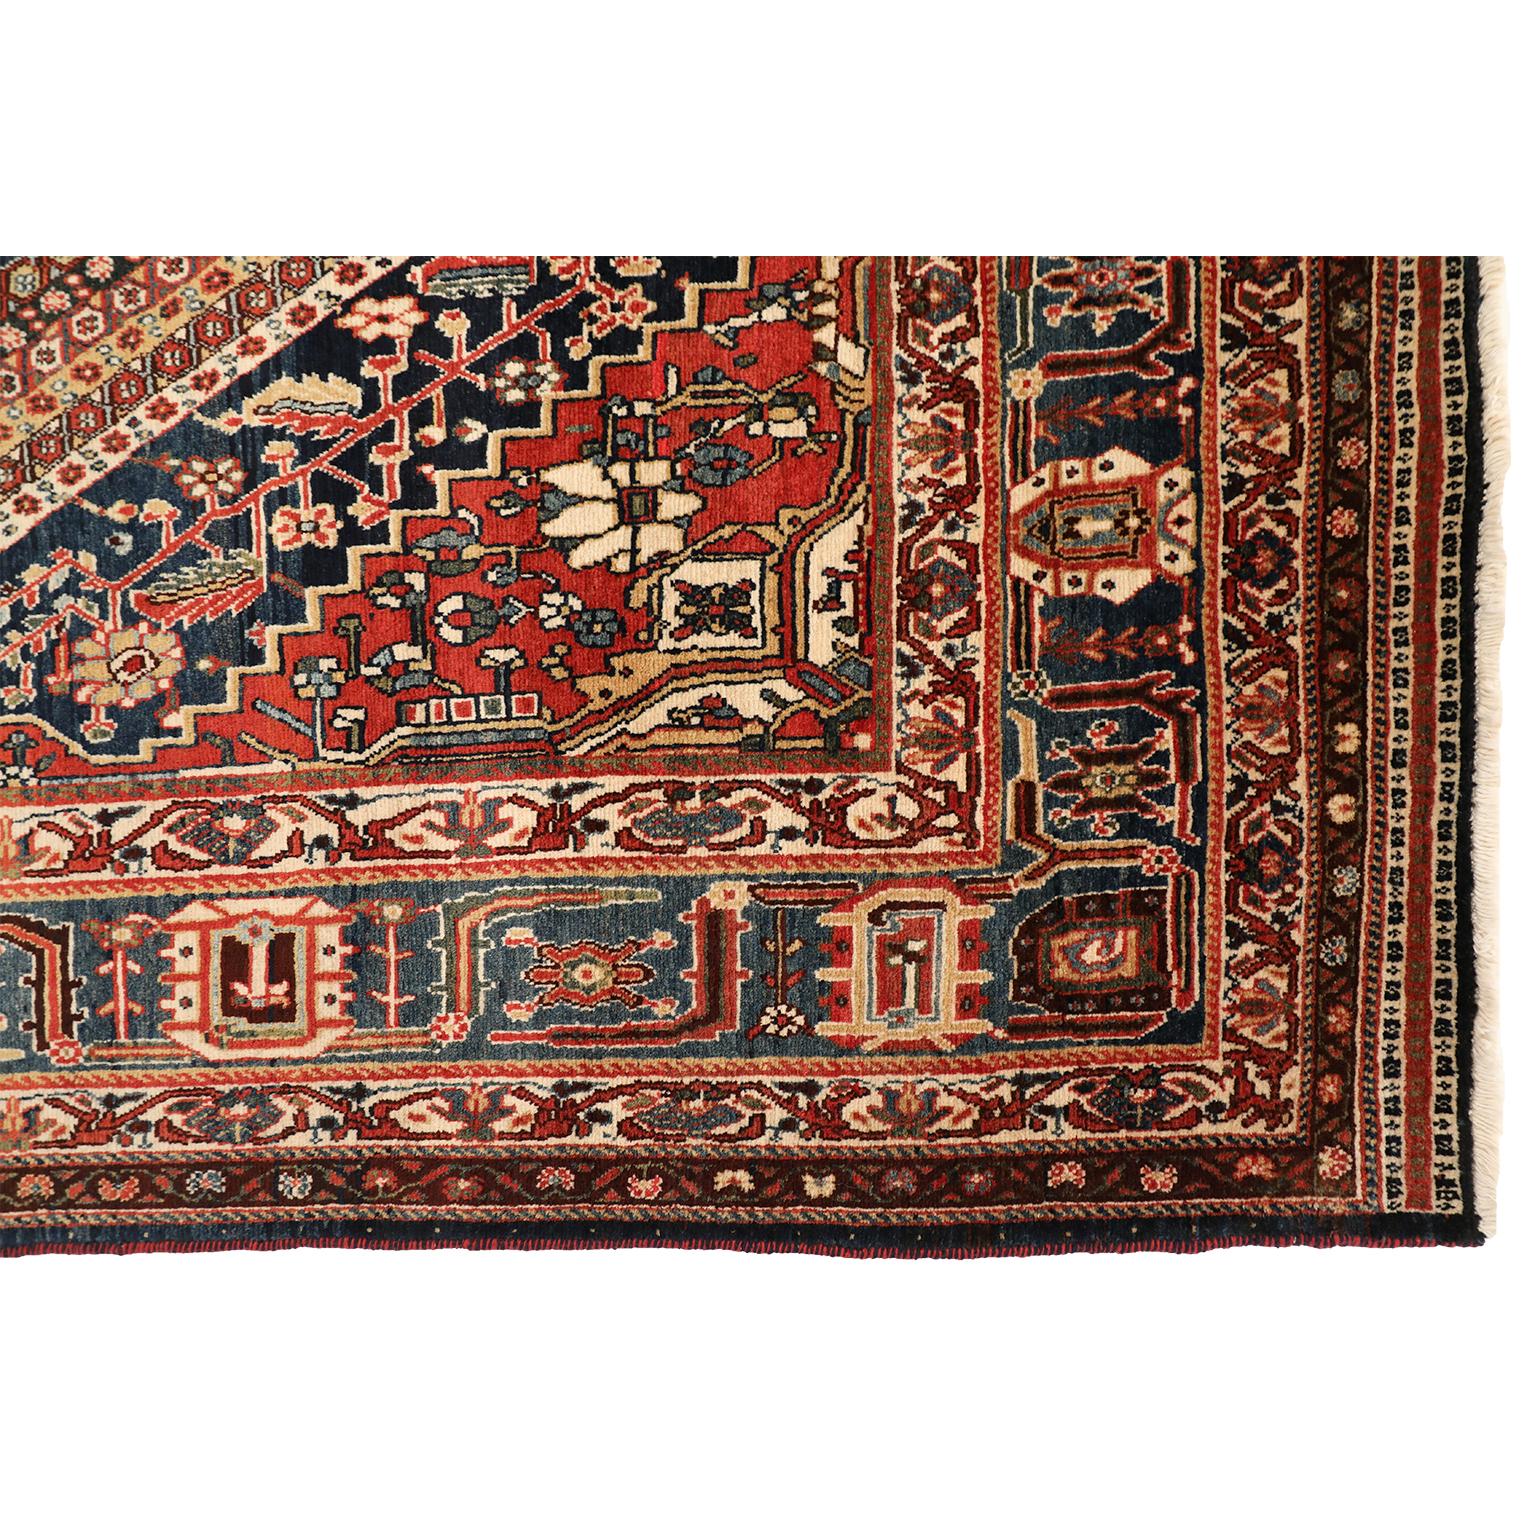 Early 20th Century Antique 1920s Qashqai Persian Rug, 11' x 17' For Sale